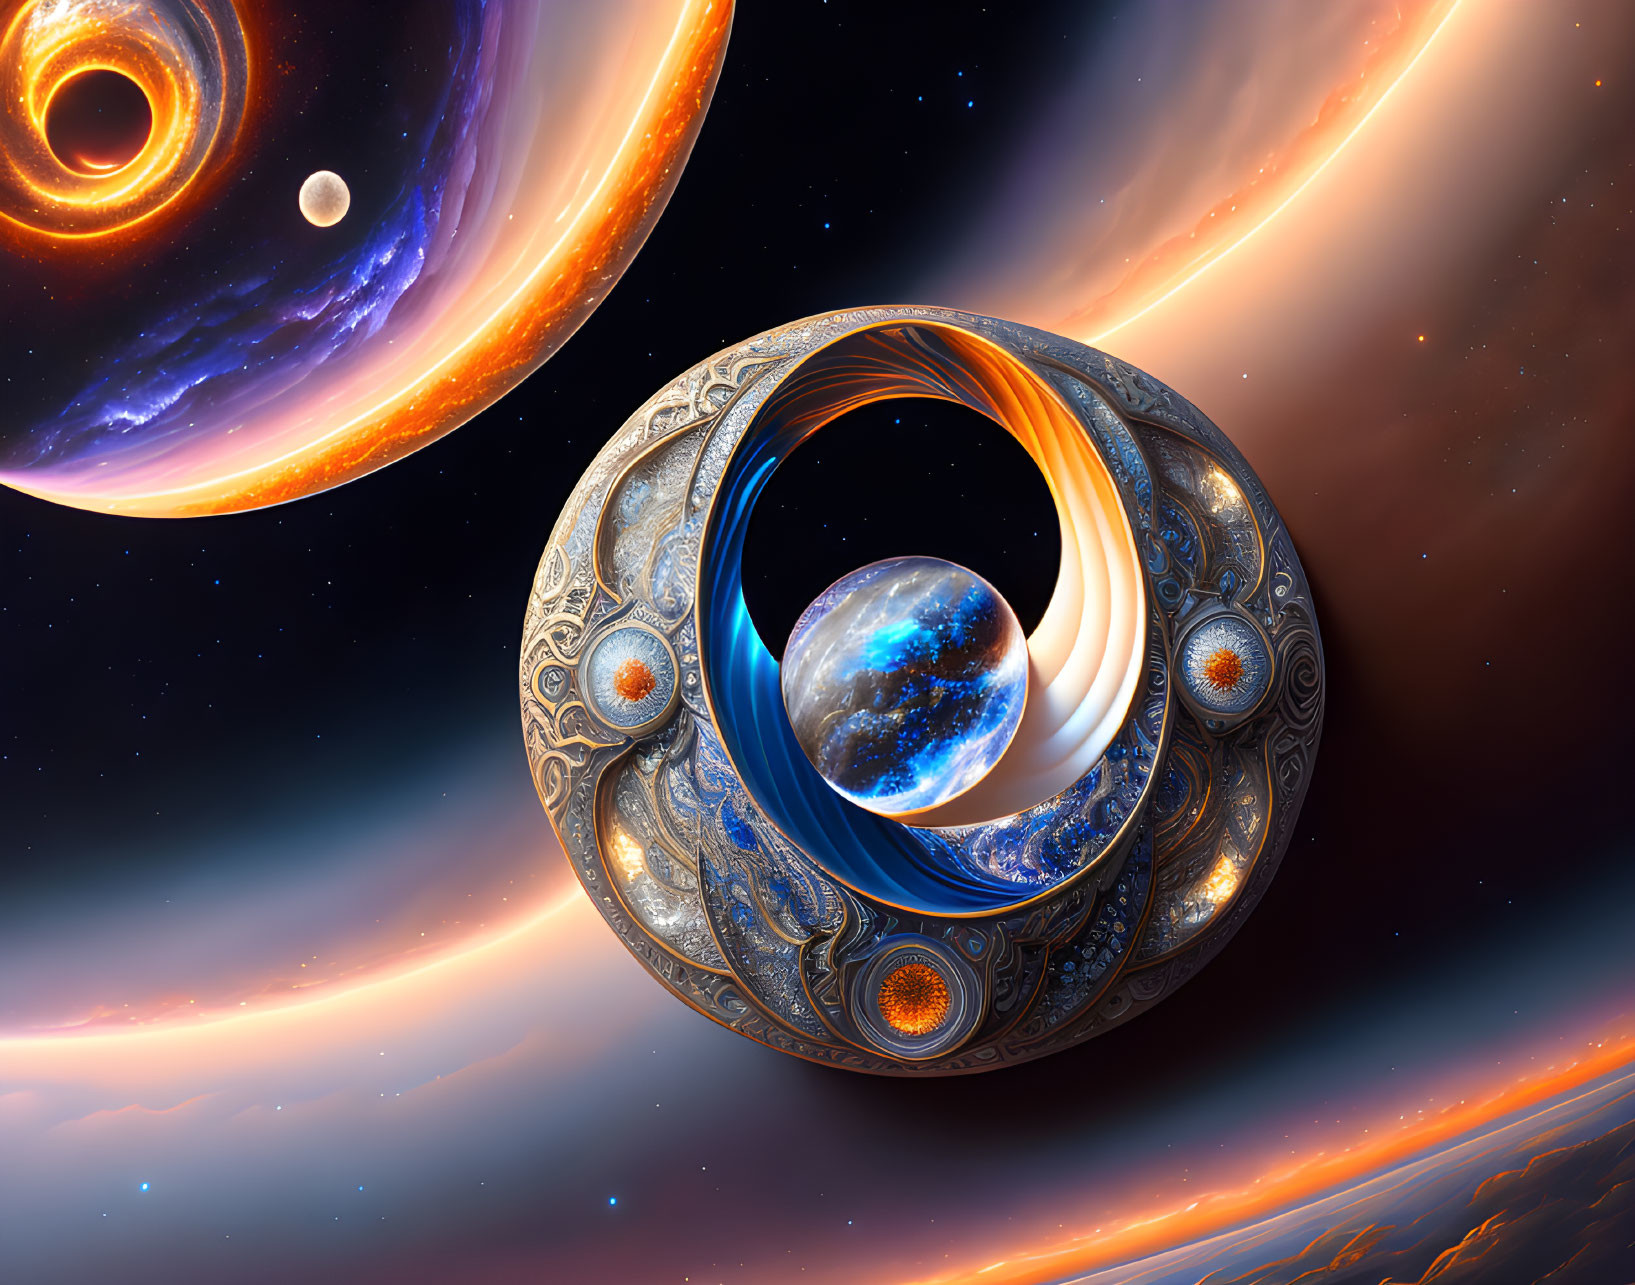 Surreal cosmic scene with Earth in ornate rings and nebulae.